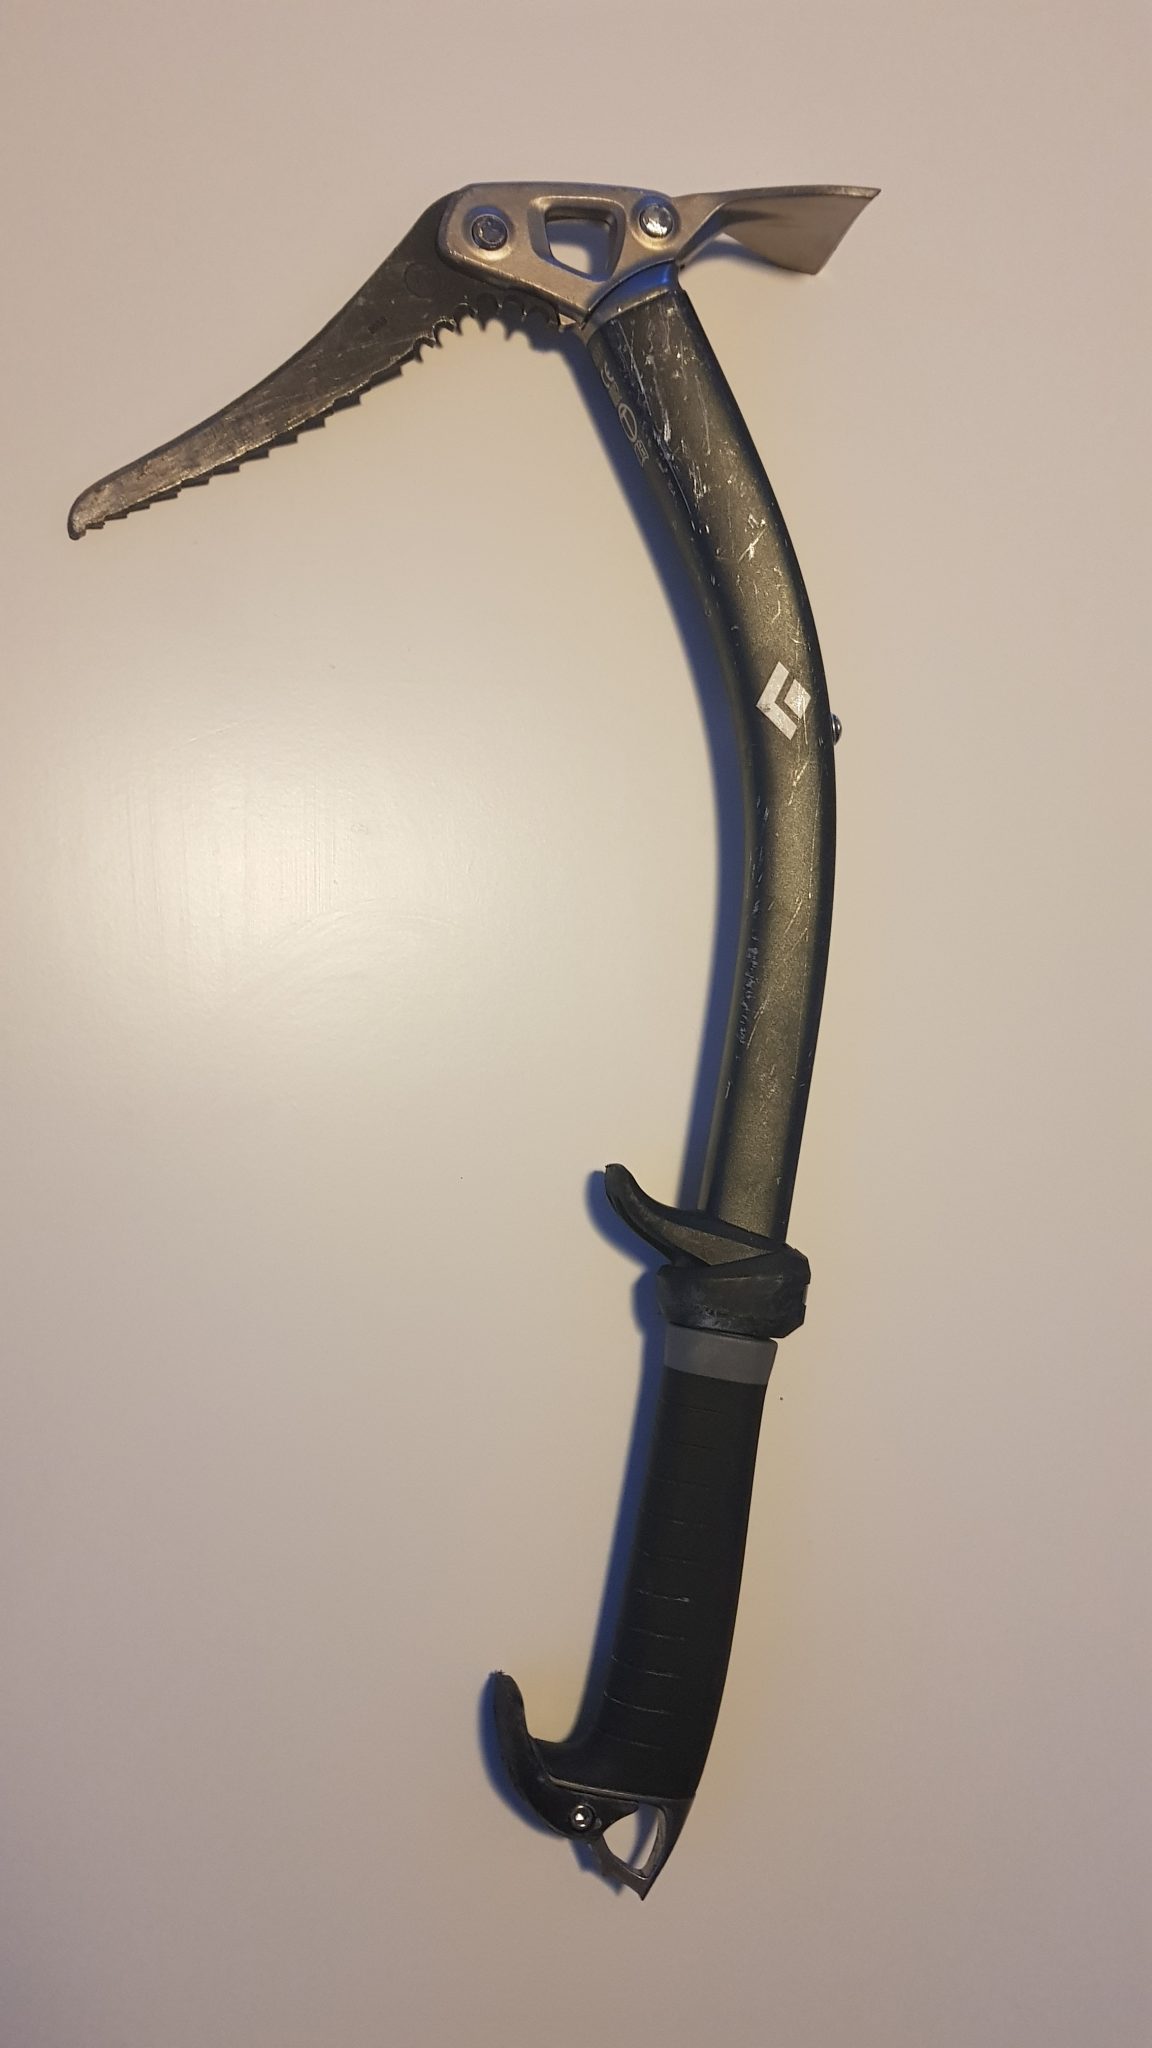 How to choose an ice axe